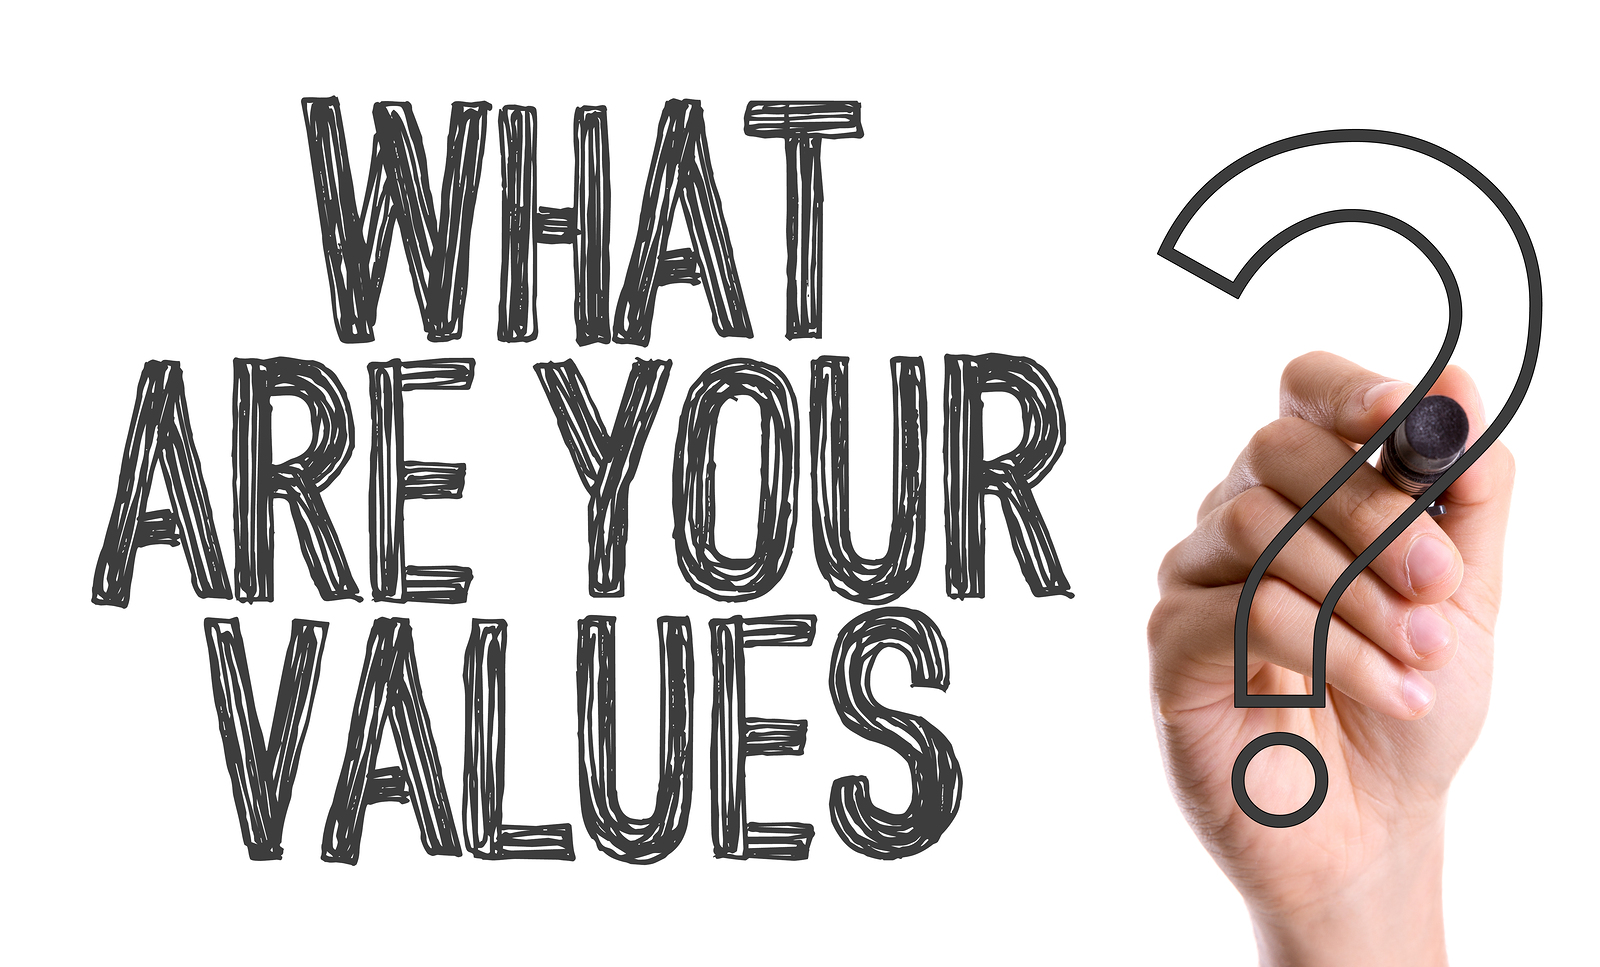 Actions Speak Louder Than Words: How One Company Transformed Its Culture Through a Values Blitz